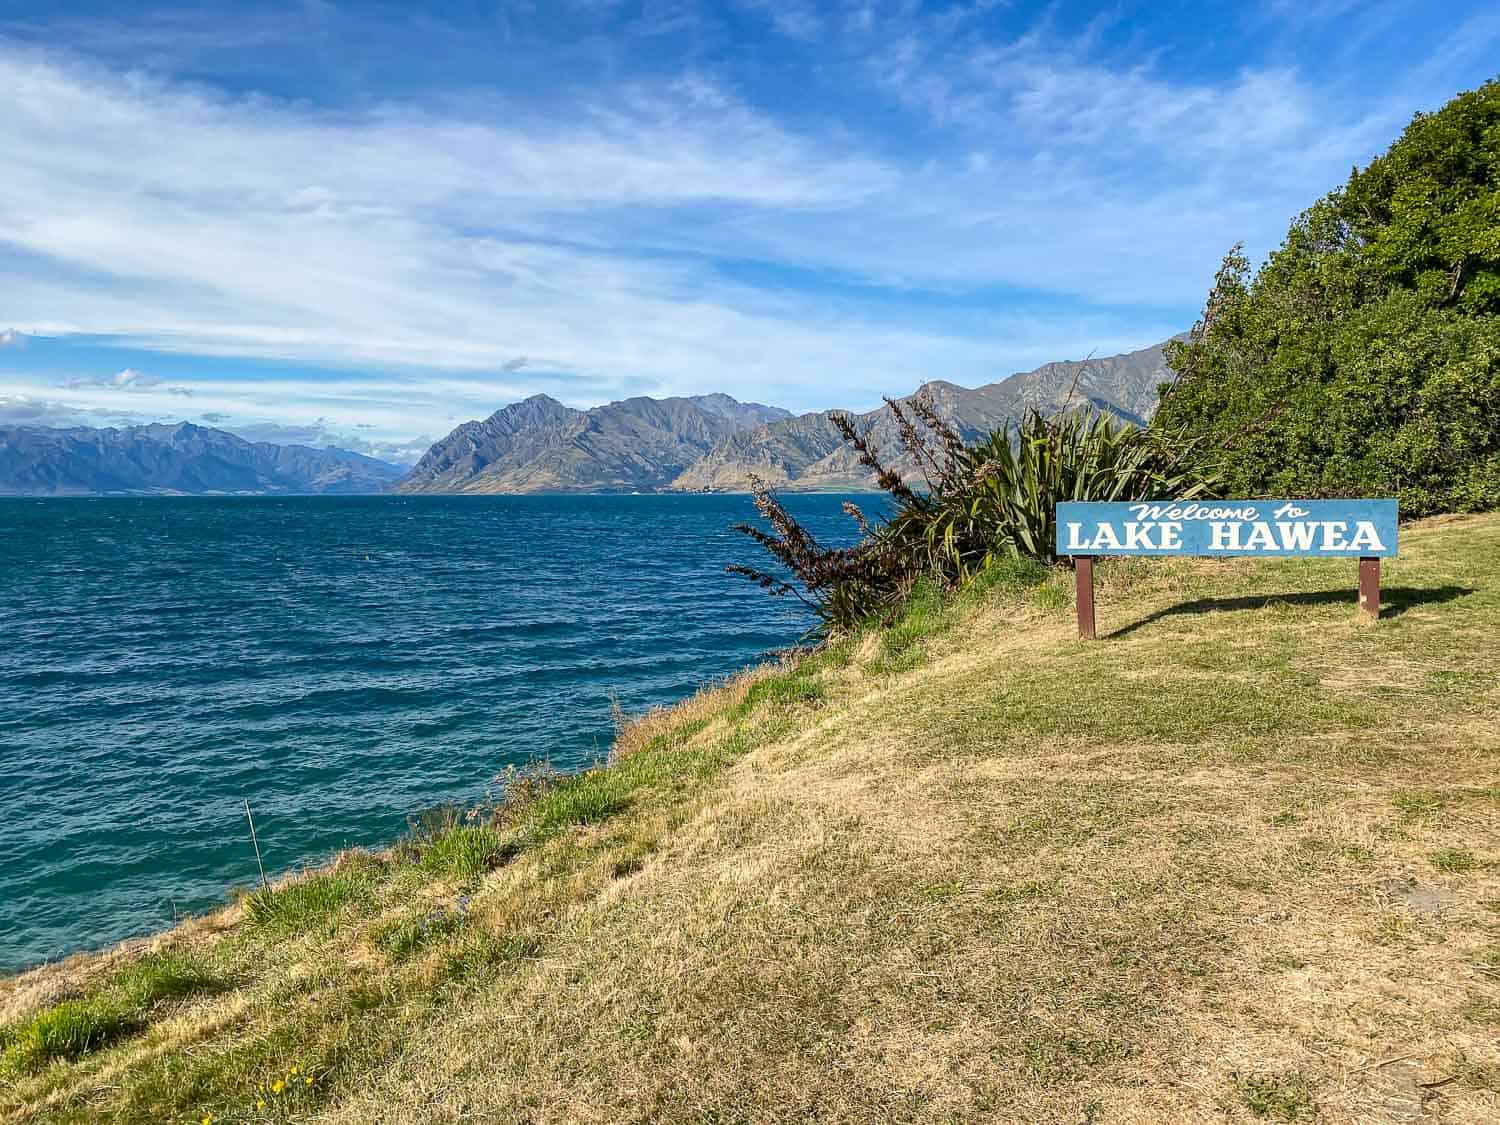 Lakeside view of Lake Hawea with mountains and sign, Wanaka, New Zealand